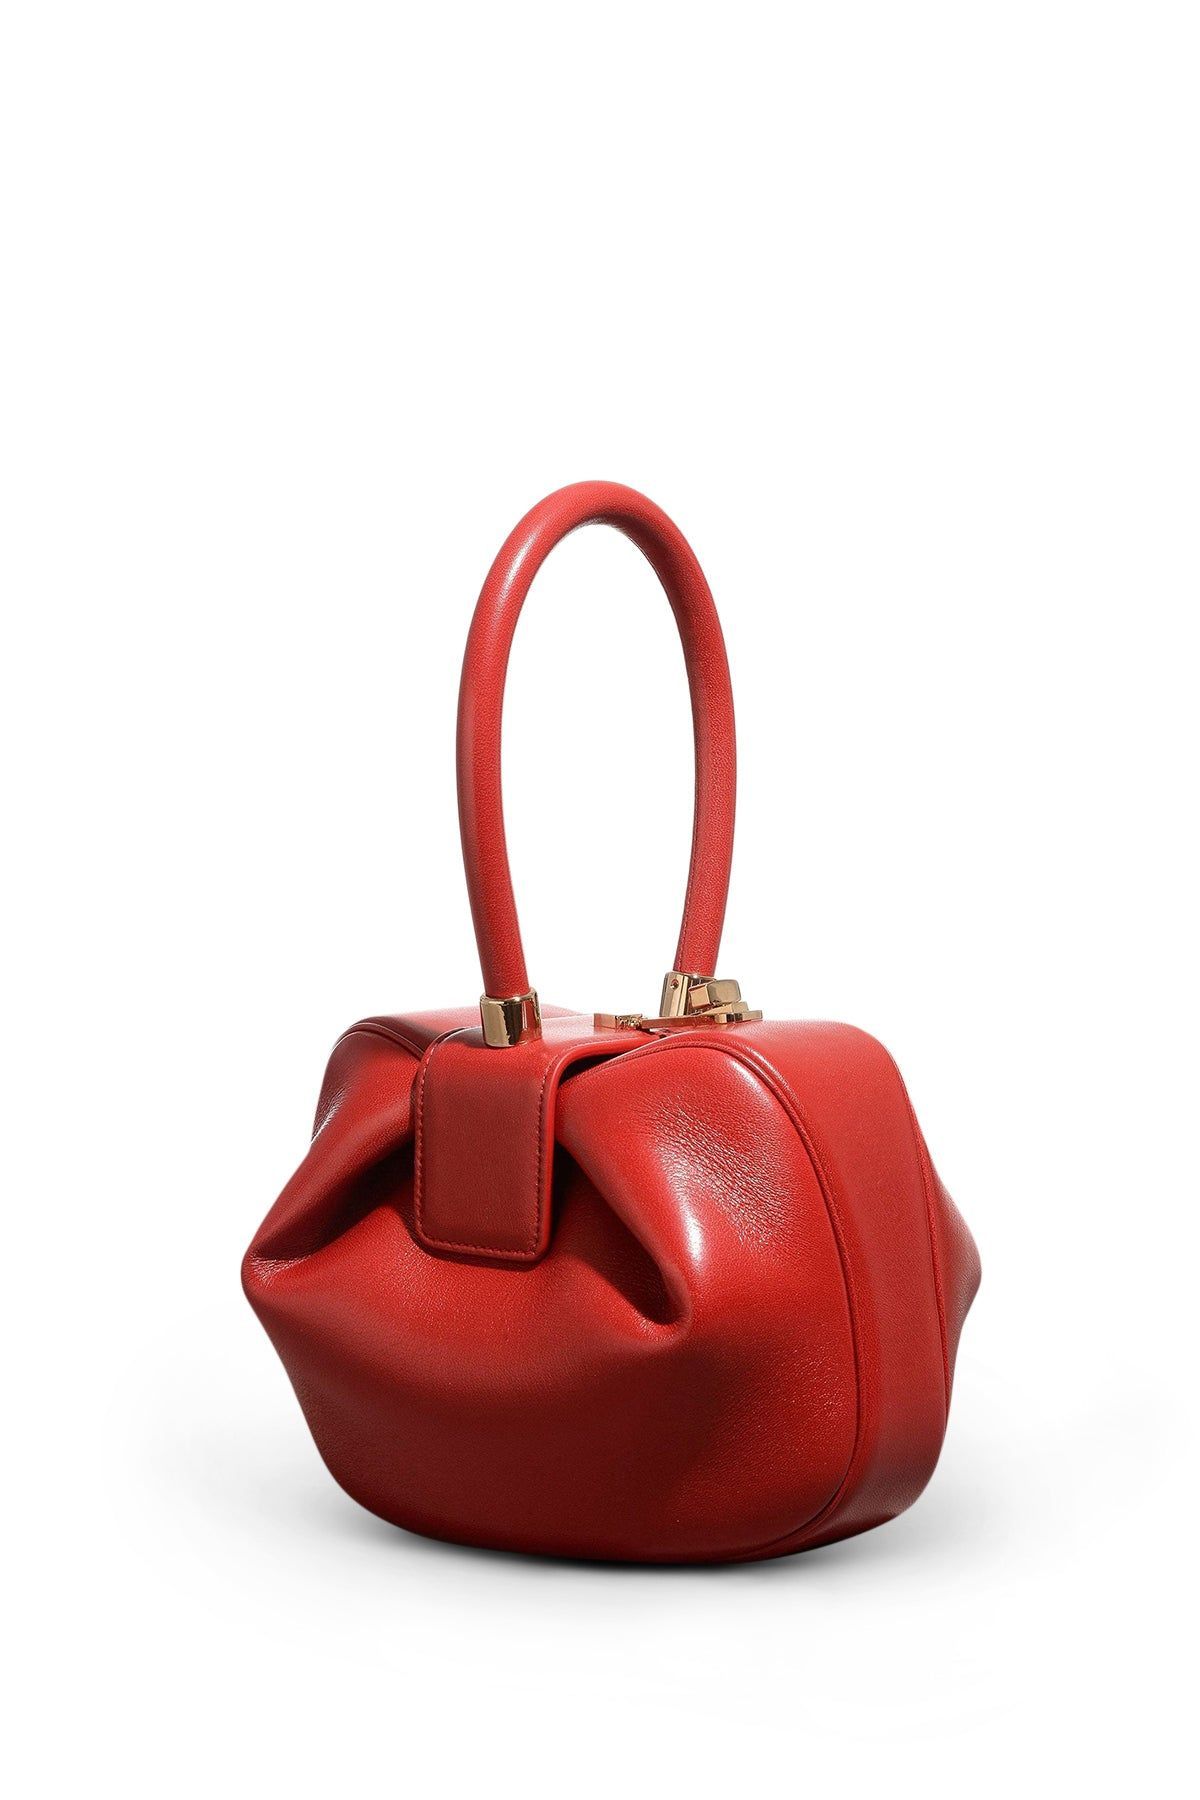 COACH Tabby 26 Pillow Leather Shoulder Bag in Red | Lyst